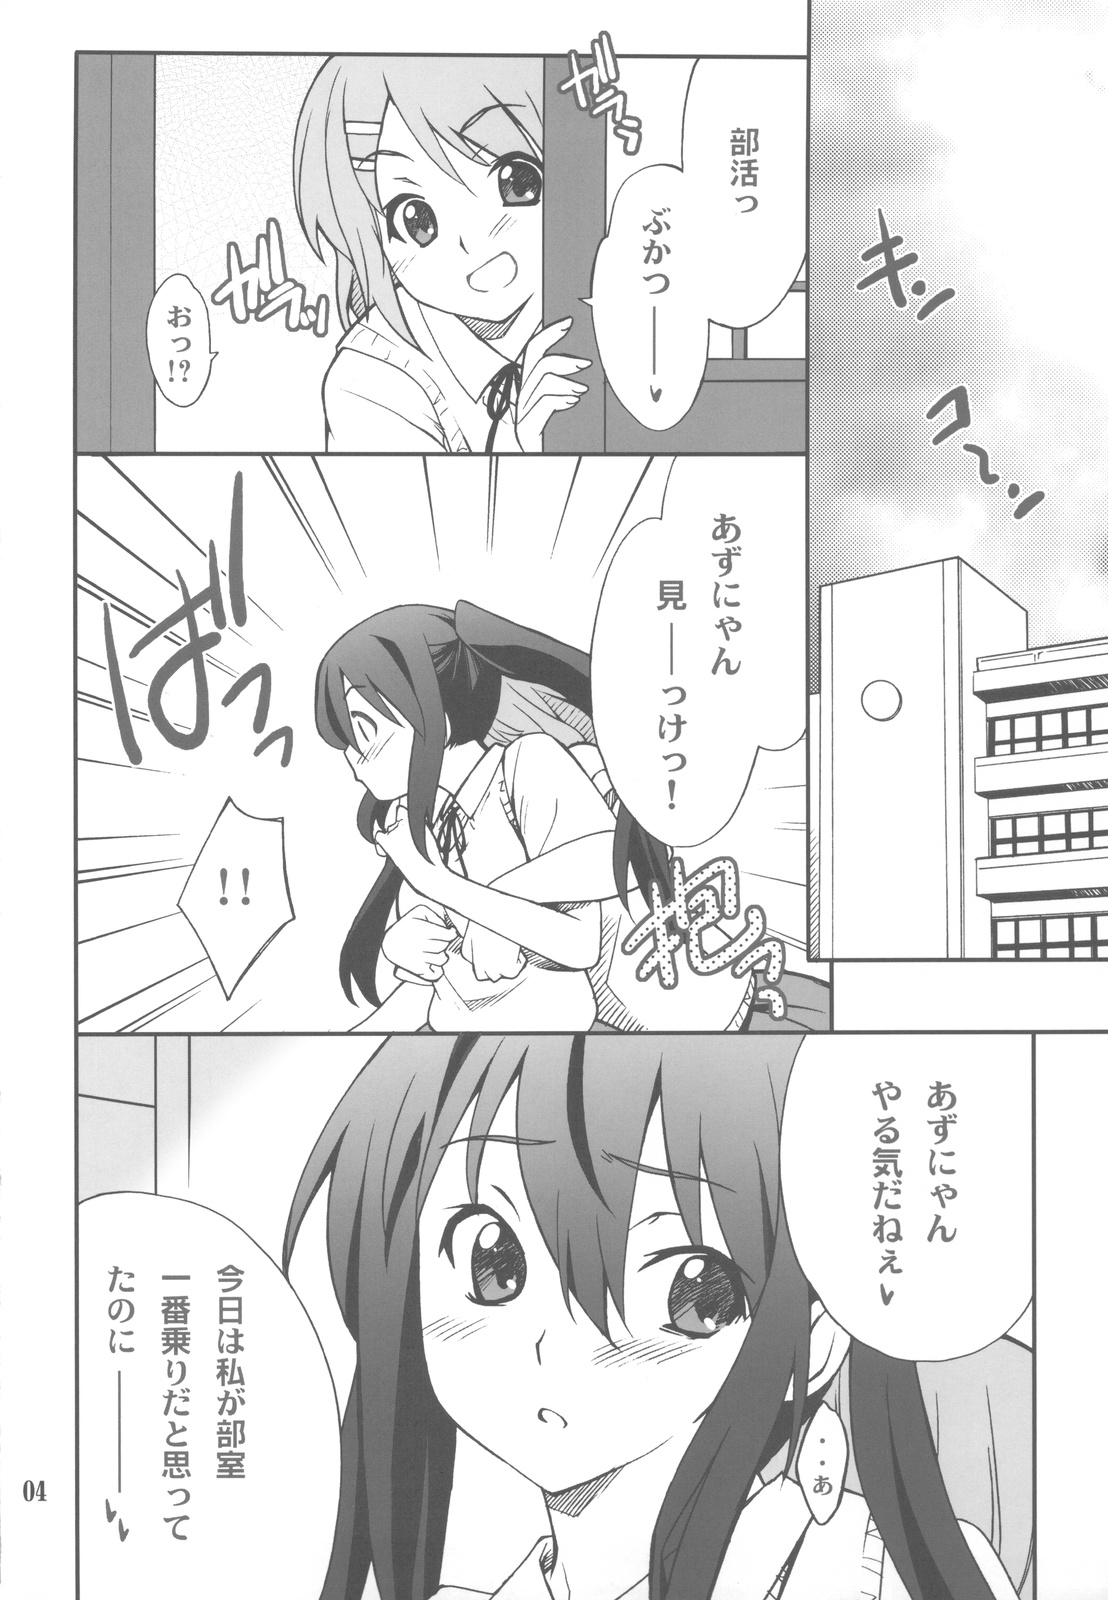 (COMIC1☆4) [P-FOREST] HXT Houkago XXX Time (K-ON!) (COMIC1☆4) (同人誌) [P-FOREST] HXT 放課後XXXタイム (けいおん！)